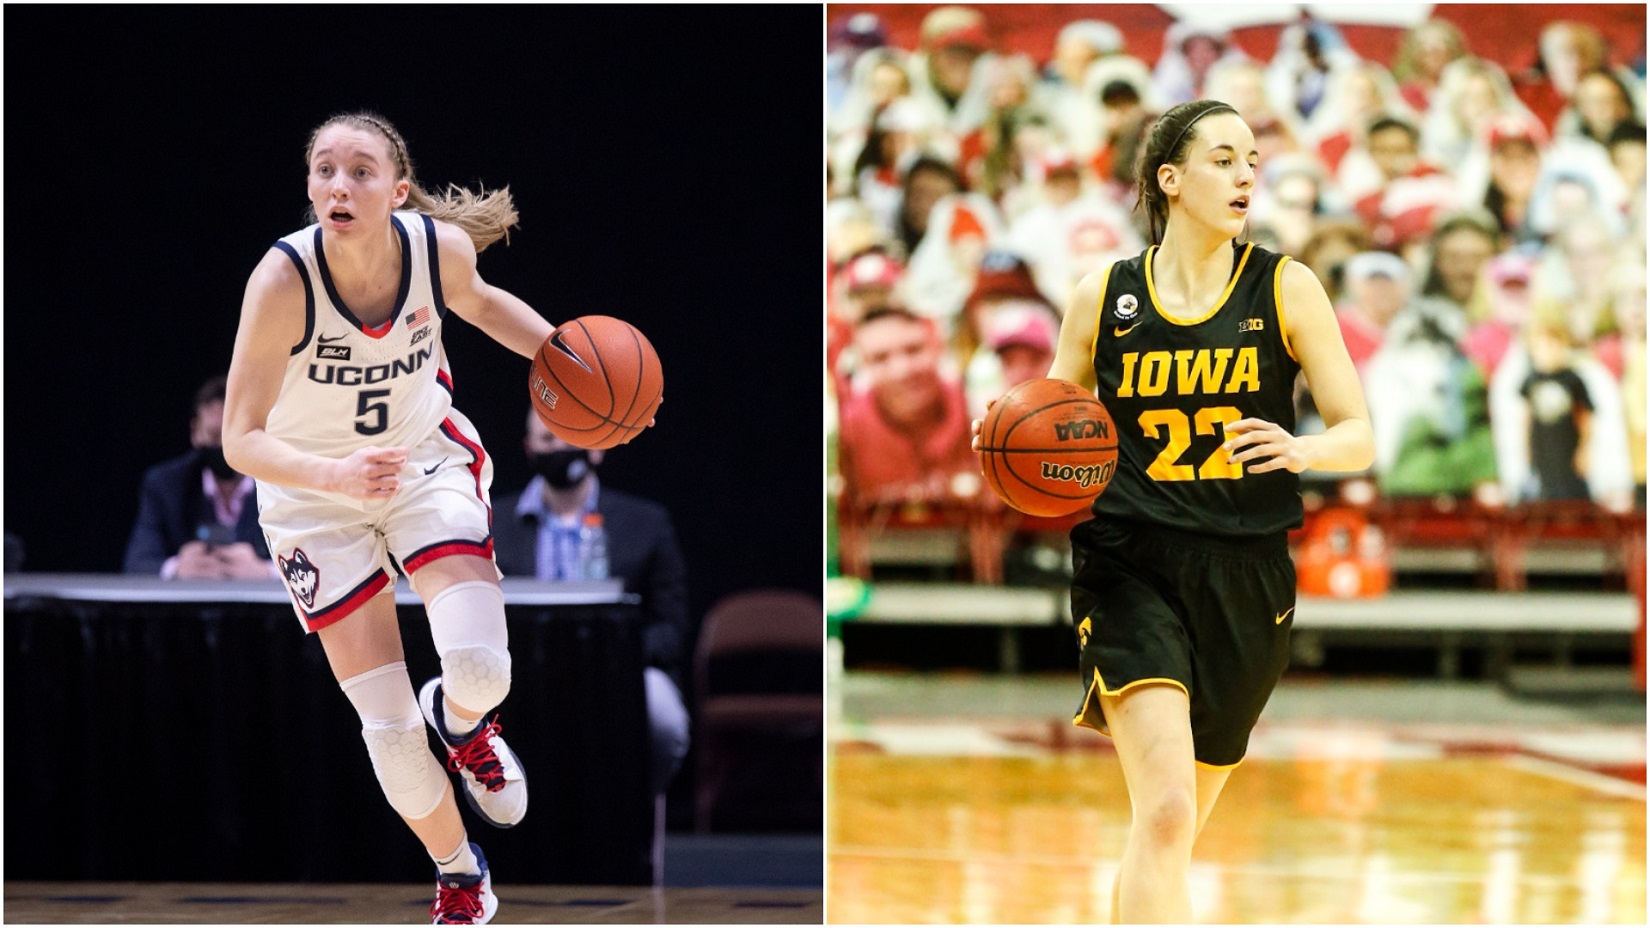 Paige Bueckers and Caitlin Clark are in the NCAA Tournament Sweet 16 in college basketball.